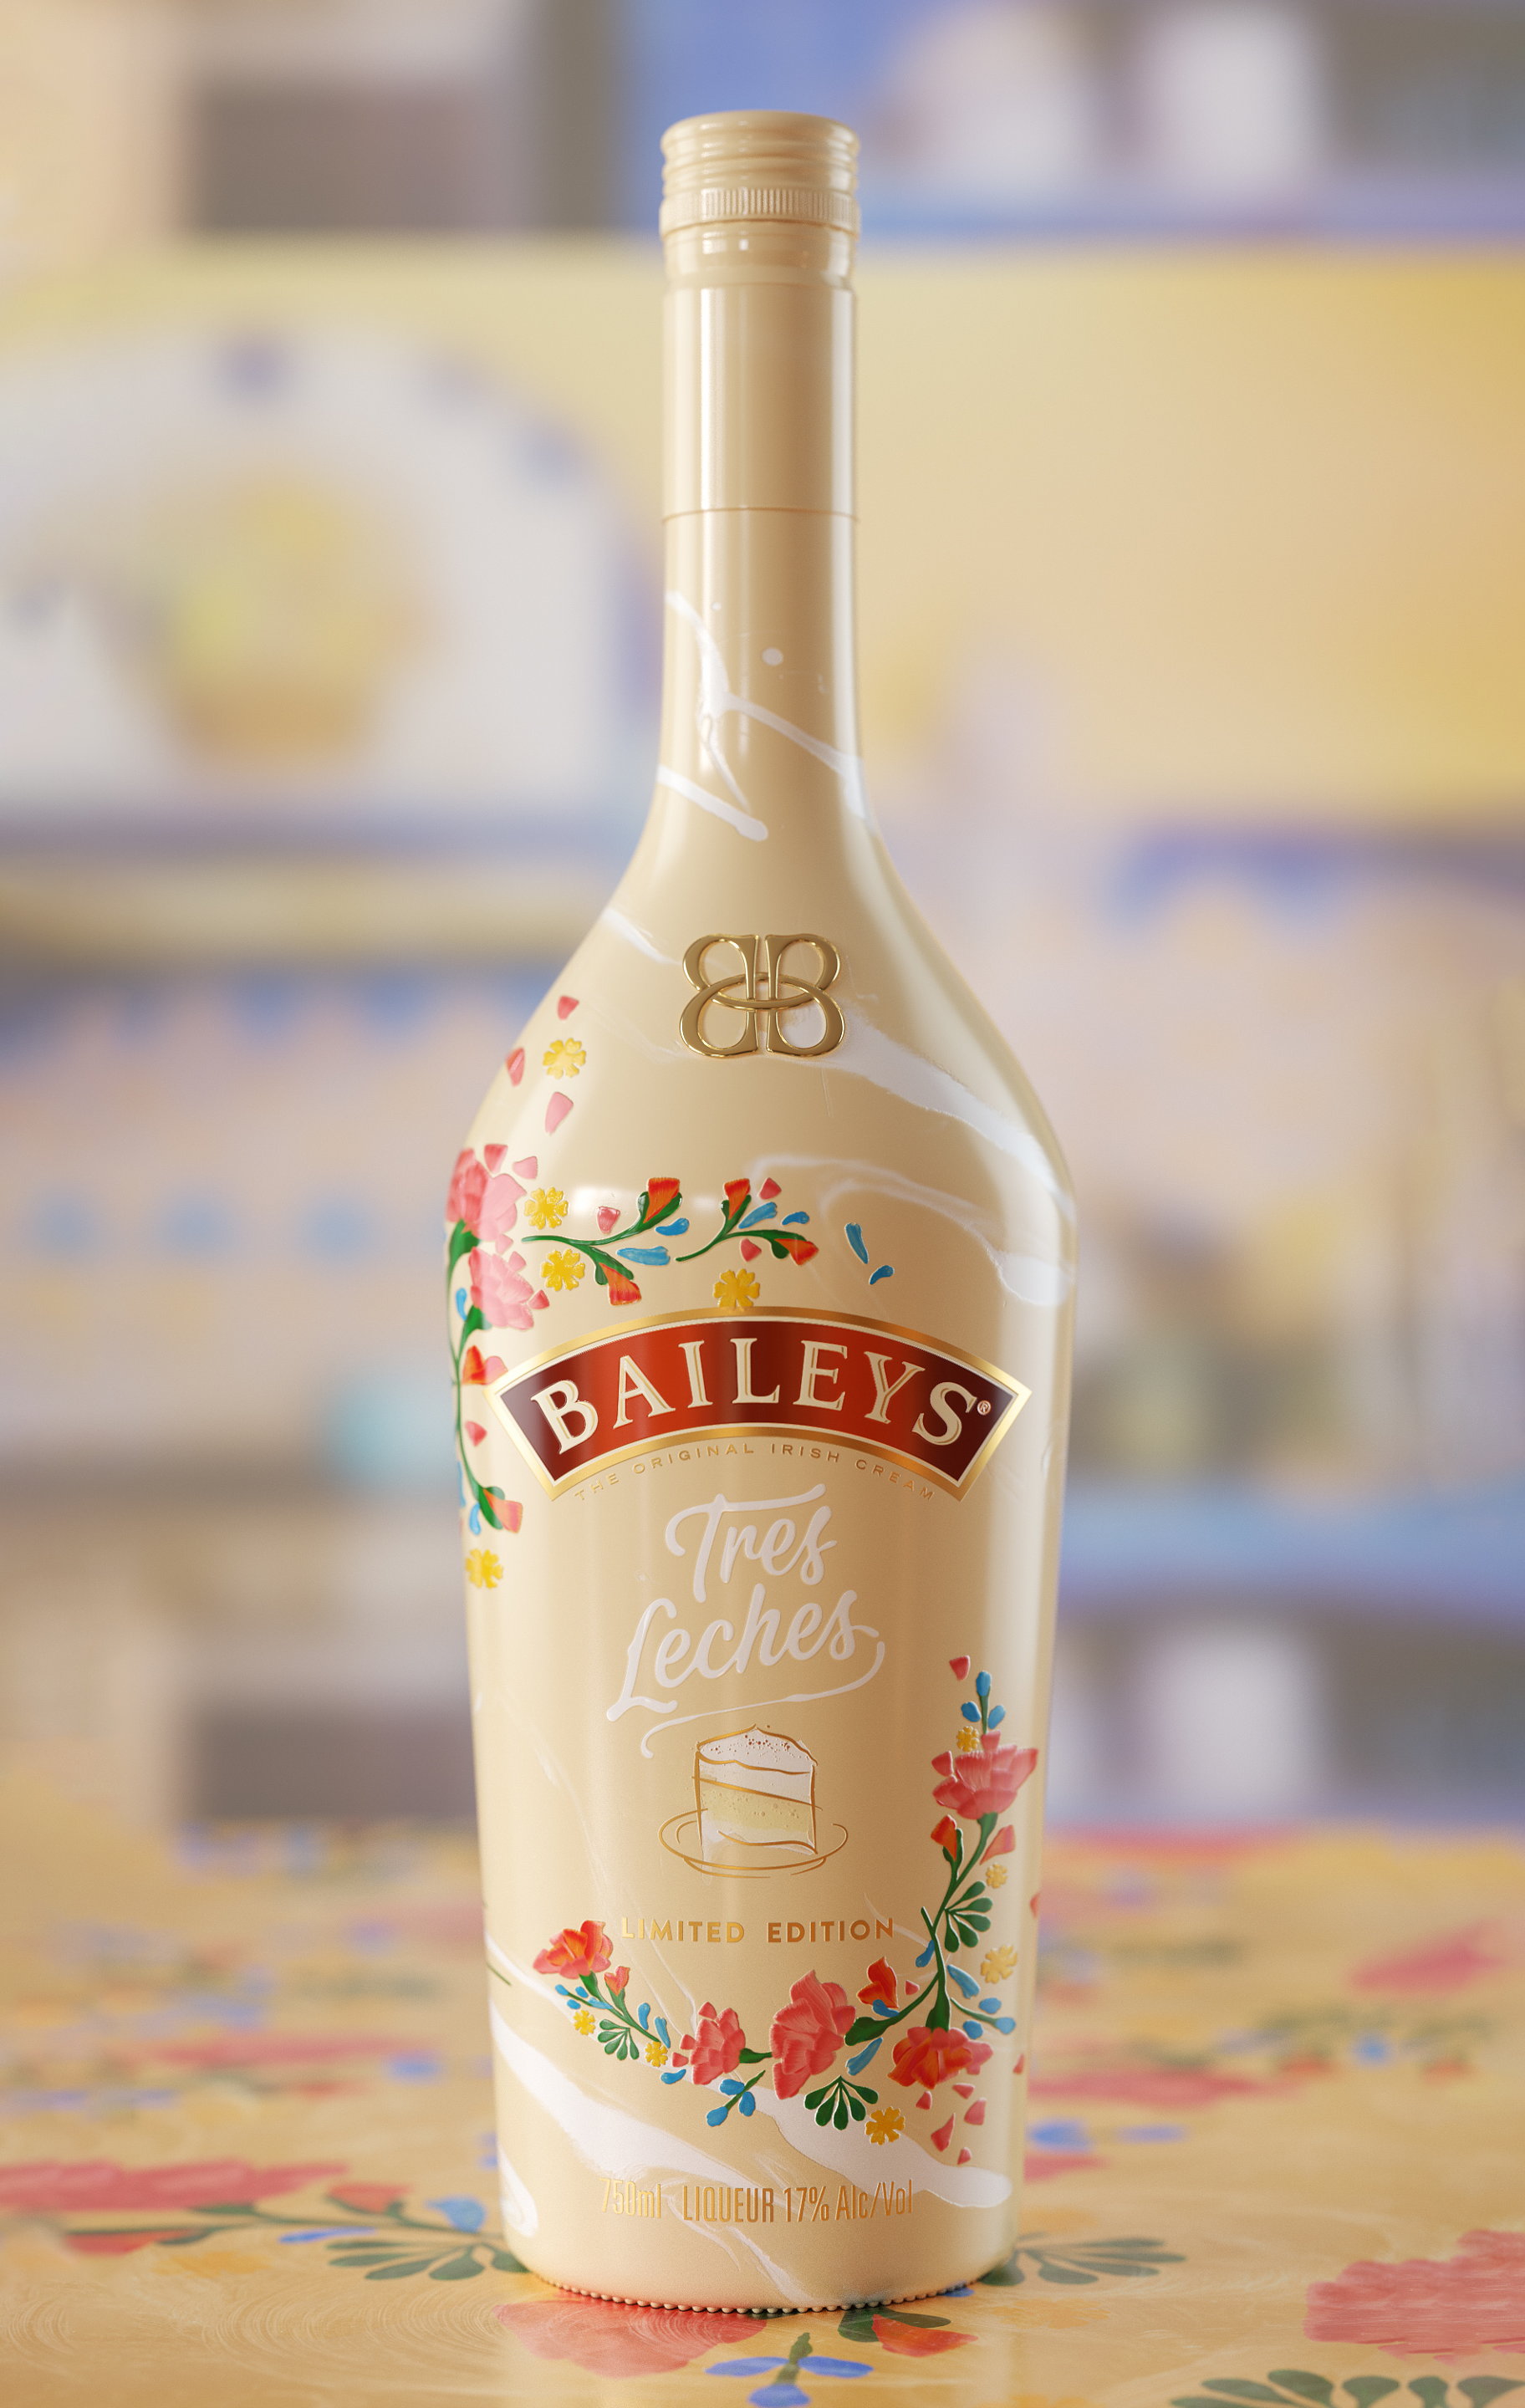  Baileys Tres Leches » = "aimg laimg fimg lazyload" /> </source> </picture> </figure>
<figure class=